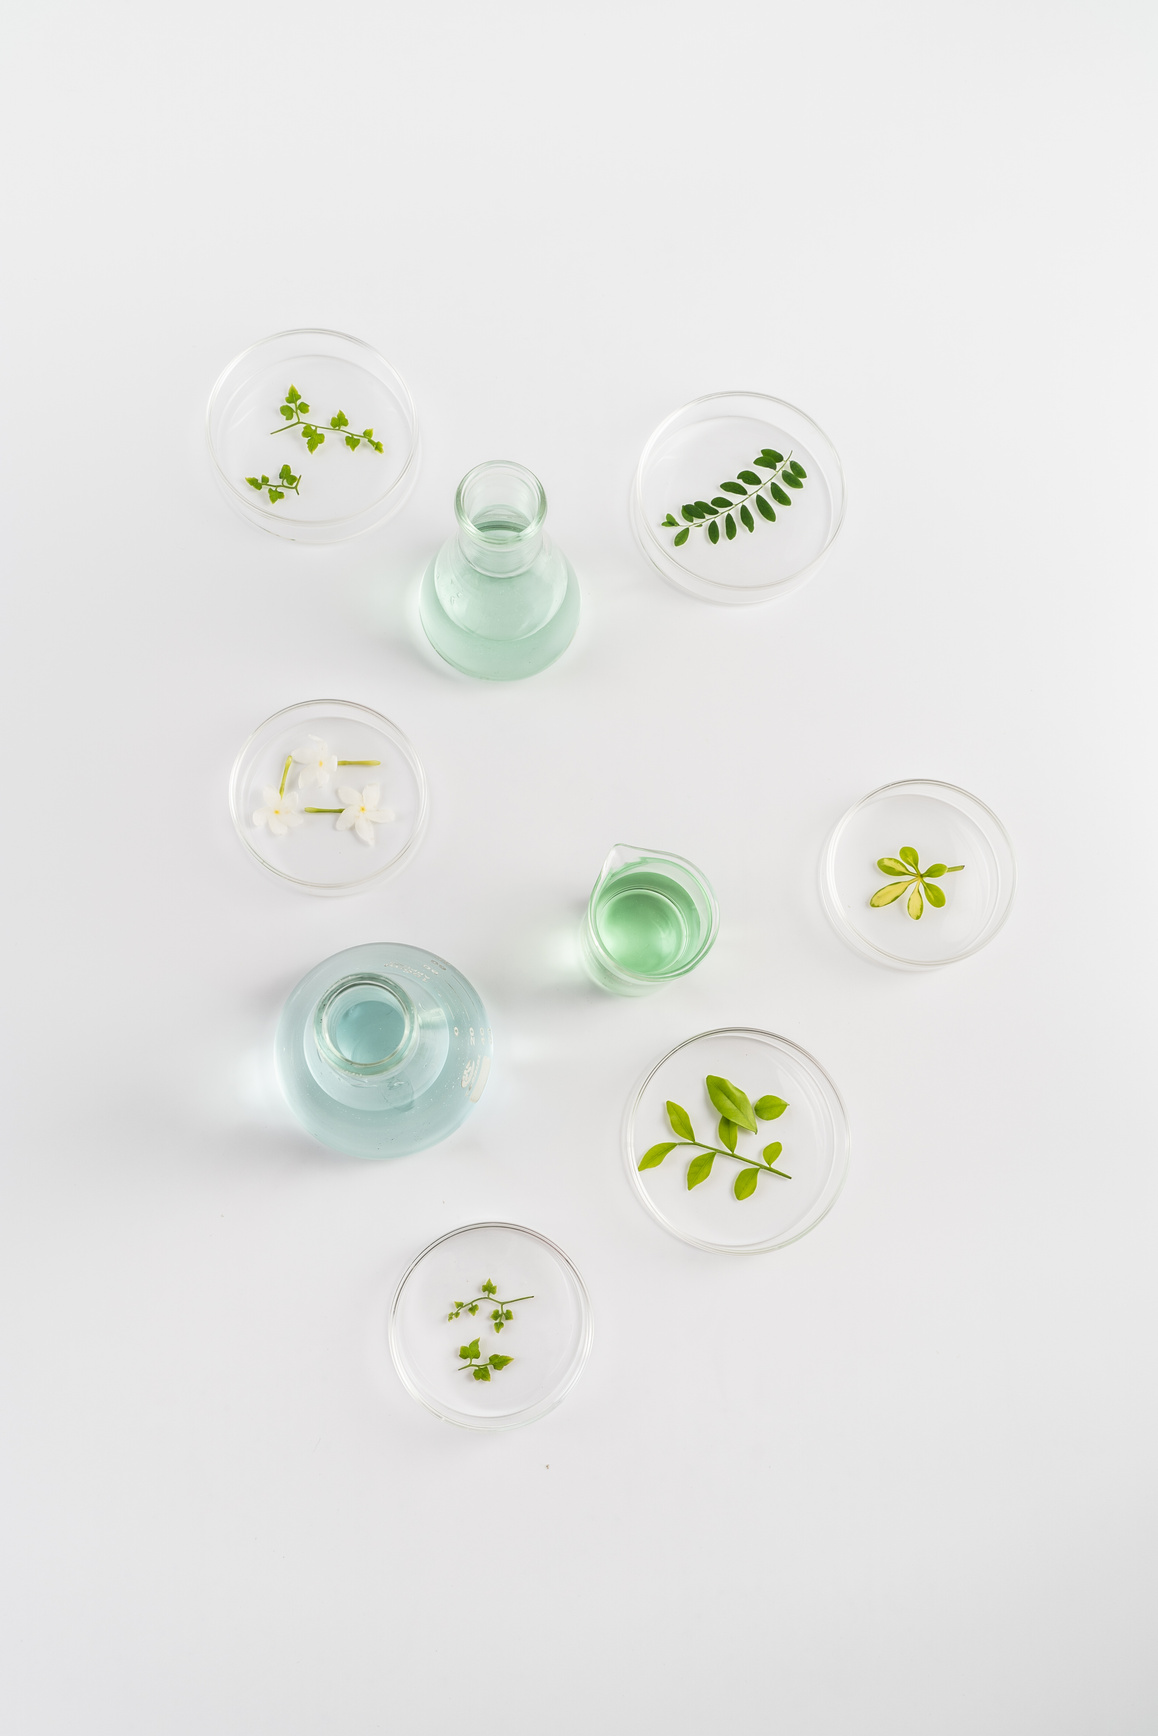 Assorted Leaves in Petri Dishes